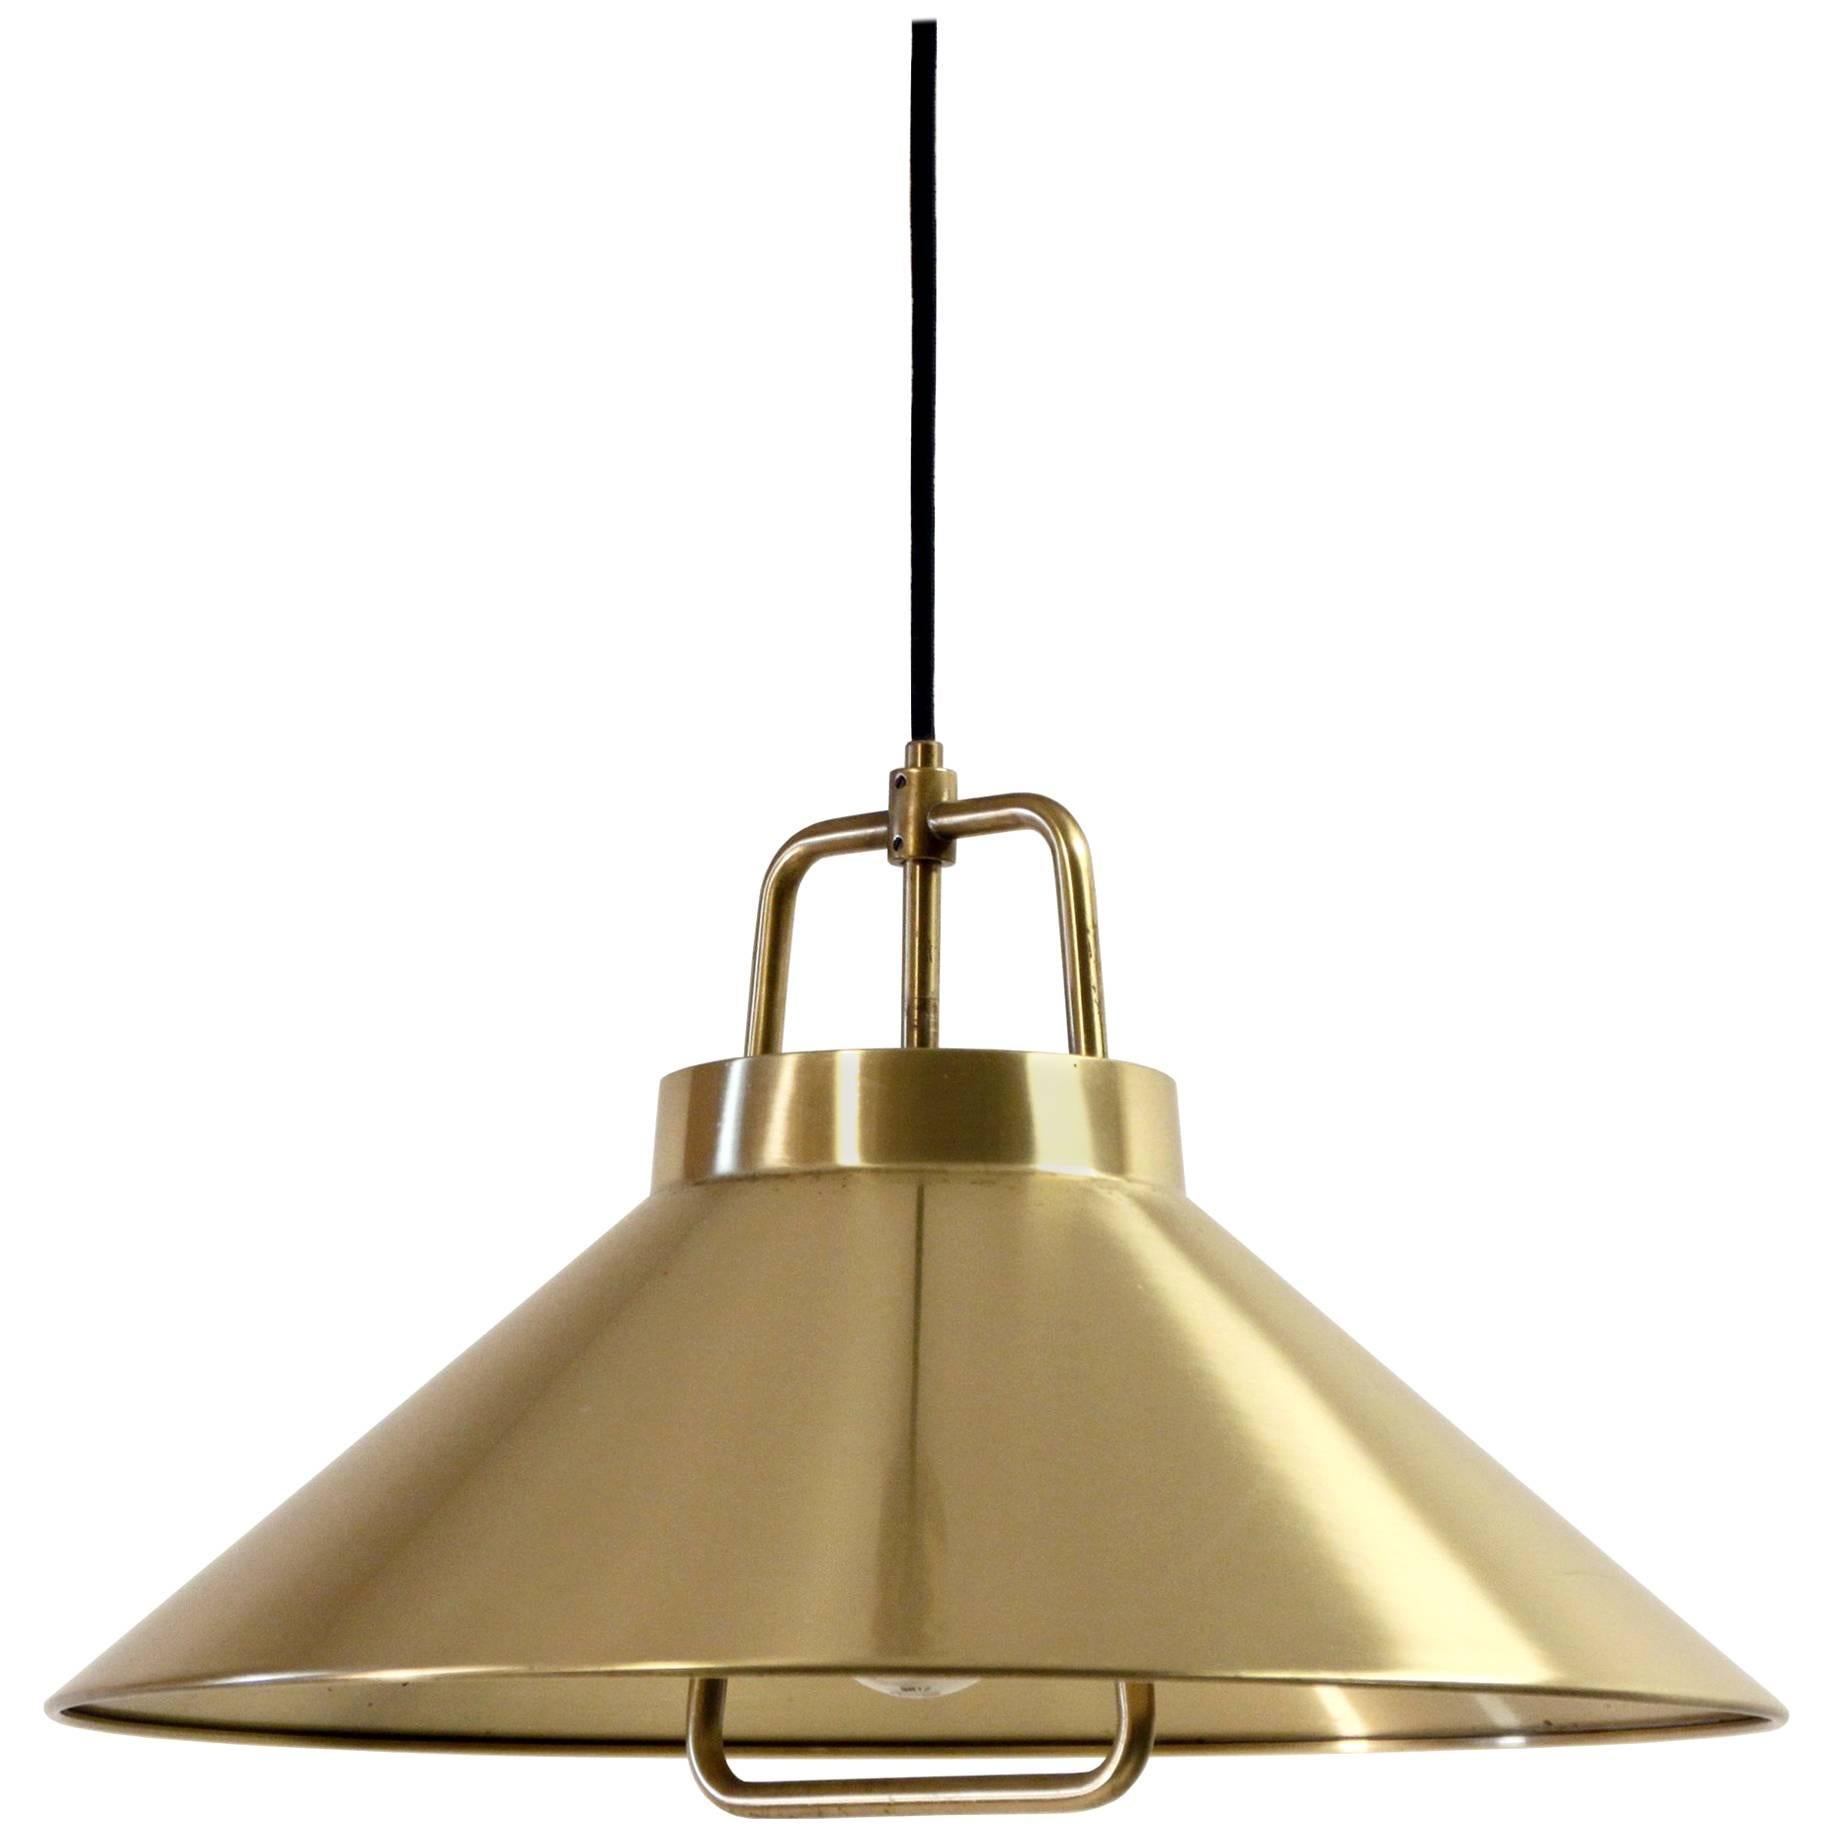 Midcentury Ceiling Light in Brass by Lyfa, 1960s For Sale